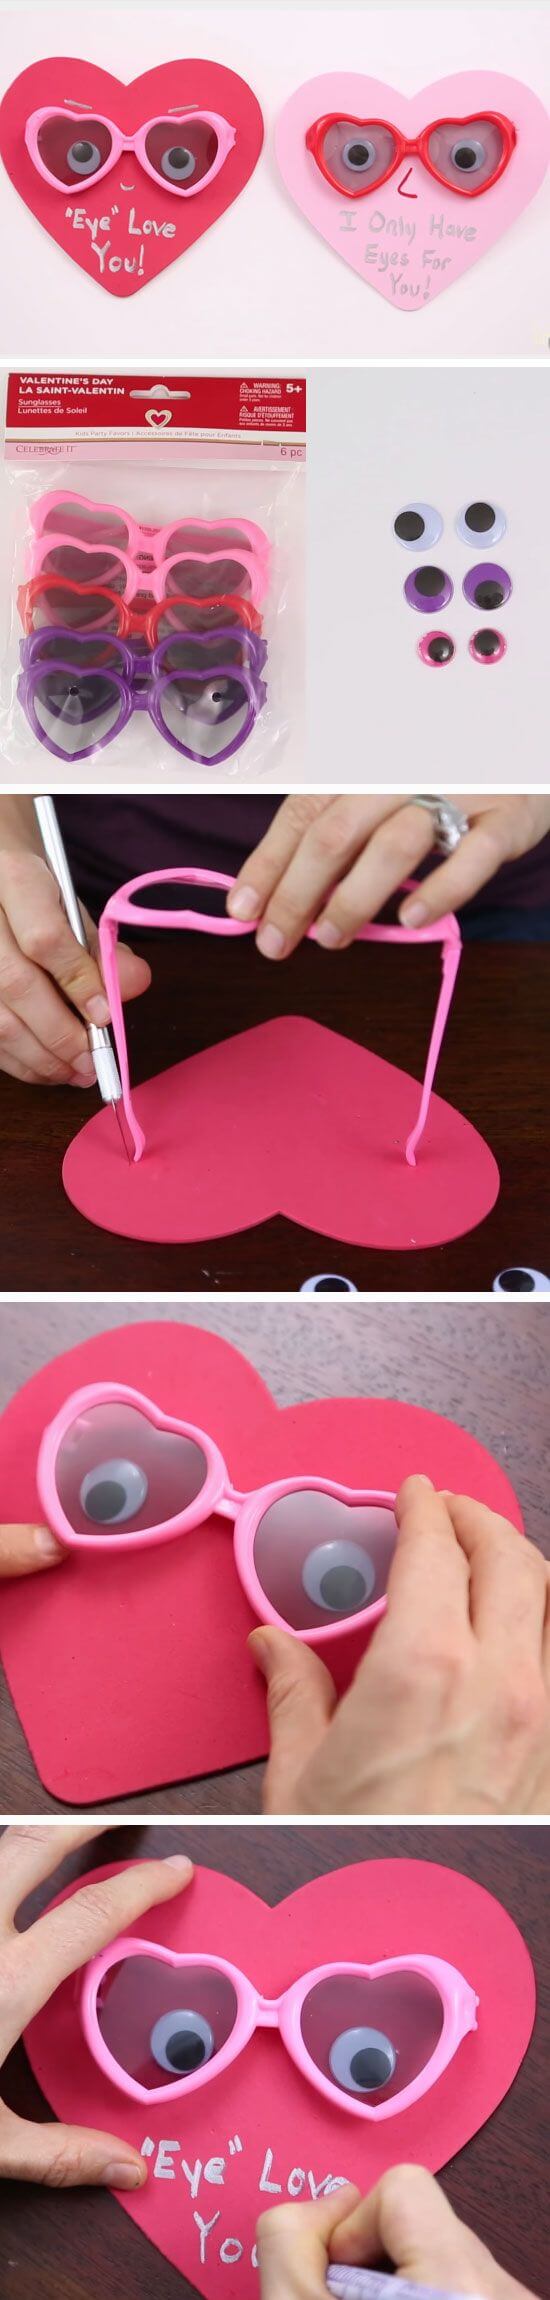 Eye Love You DIY Valentines Crafts for Kids to Make 30+ Easy Valentine's Day Crafts for Kids